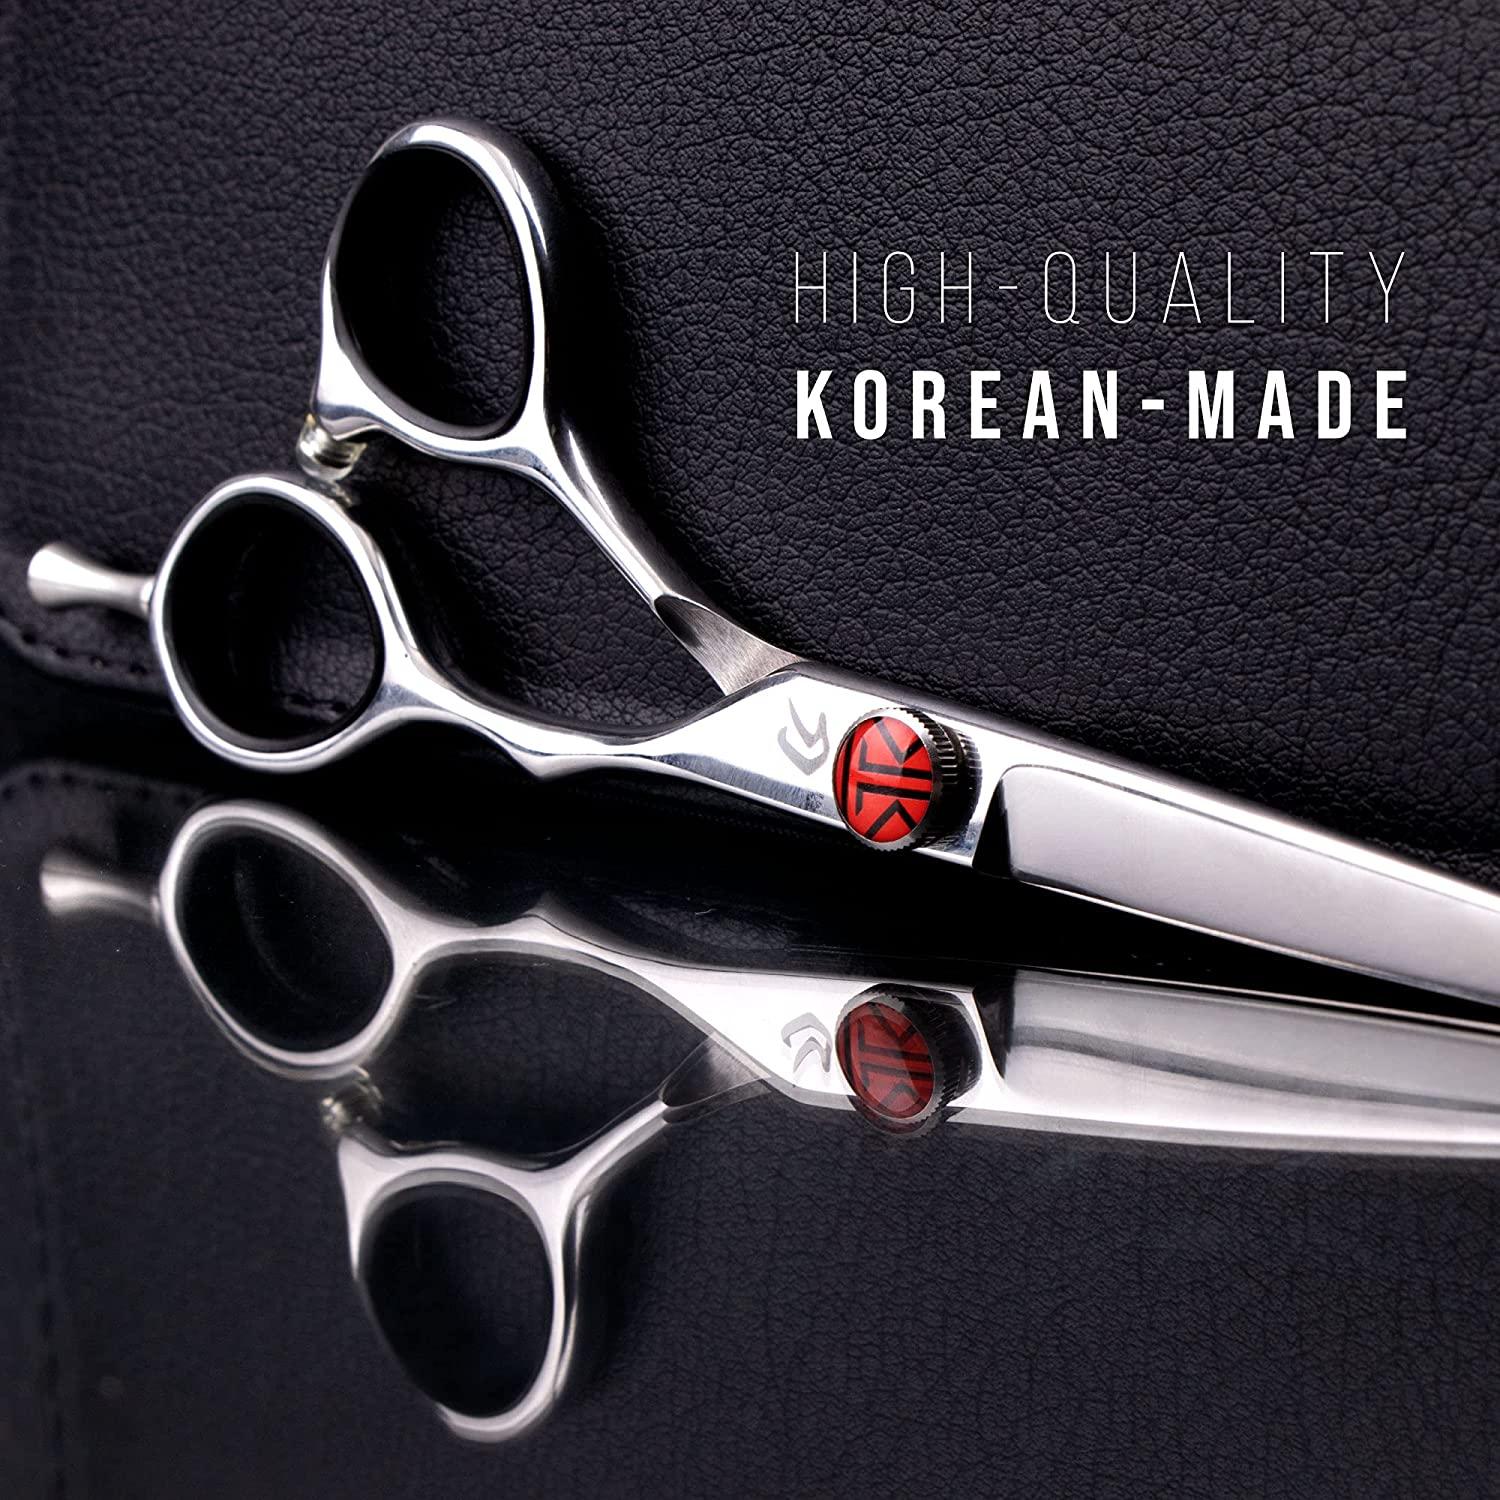 Tokko Katana Classic Professional Razor Edge 440C Japanese Stainless Steel  Hair Cutting Scissors 6.5 Barber Shears With Adjustment Screw and Leather  Case